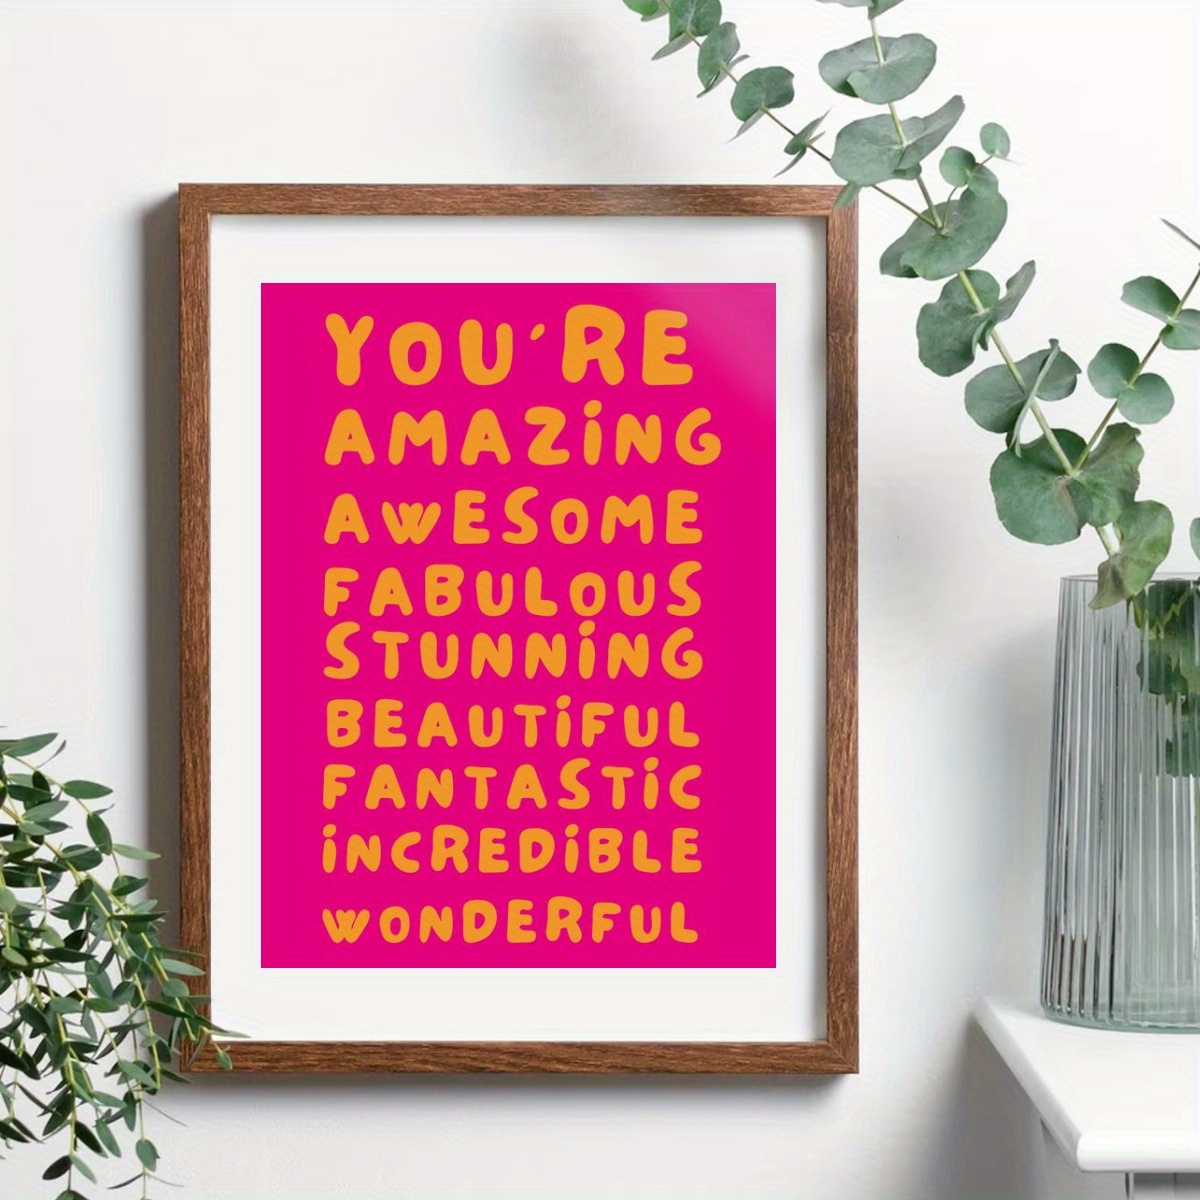 

Inspirational Pink And Orange Poster, 30x40cm Thick Canvas Art, Frameless, Waterproof And Light-resistant, Trendy Aesthetic Wall Decor For Girls Dorm Room, Made Of Polyester Fiber.